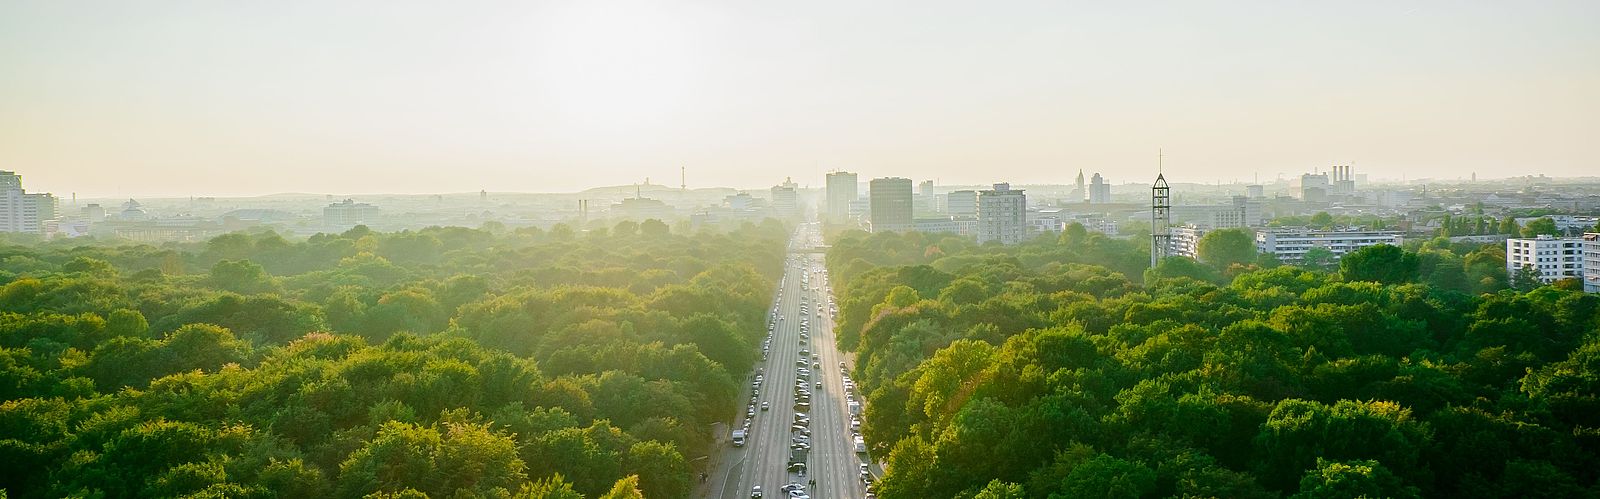 Aerial view of highway admidst trees